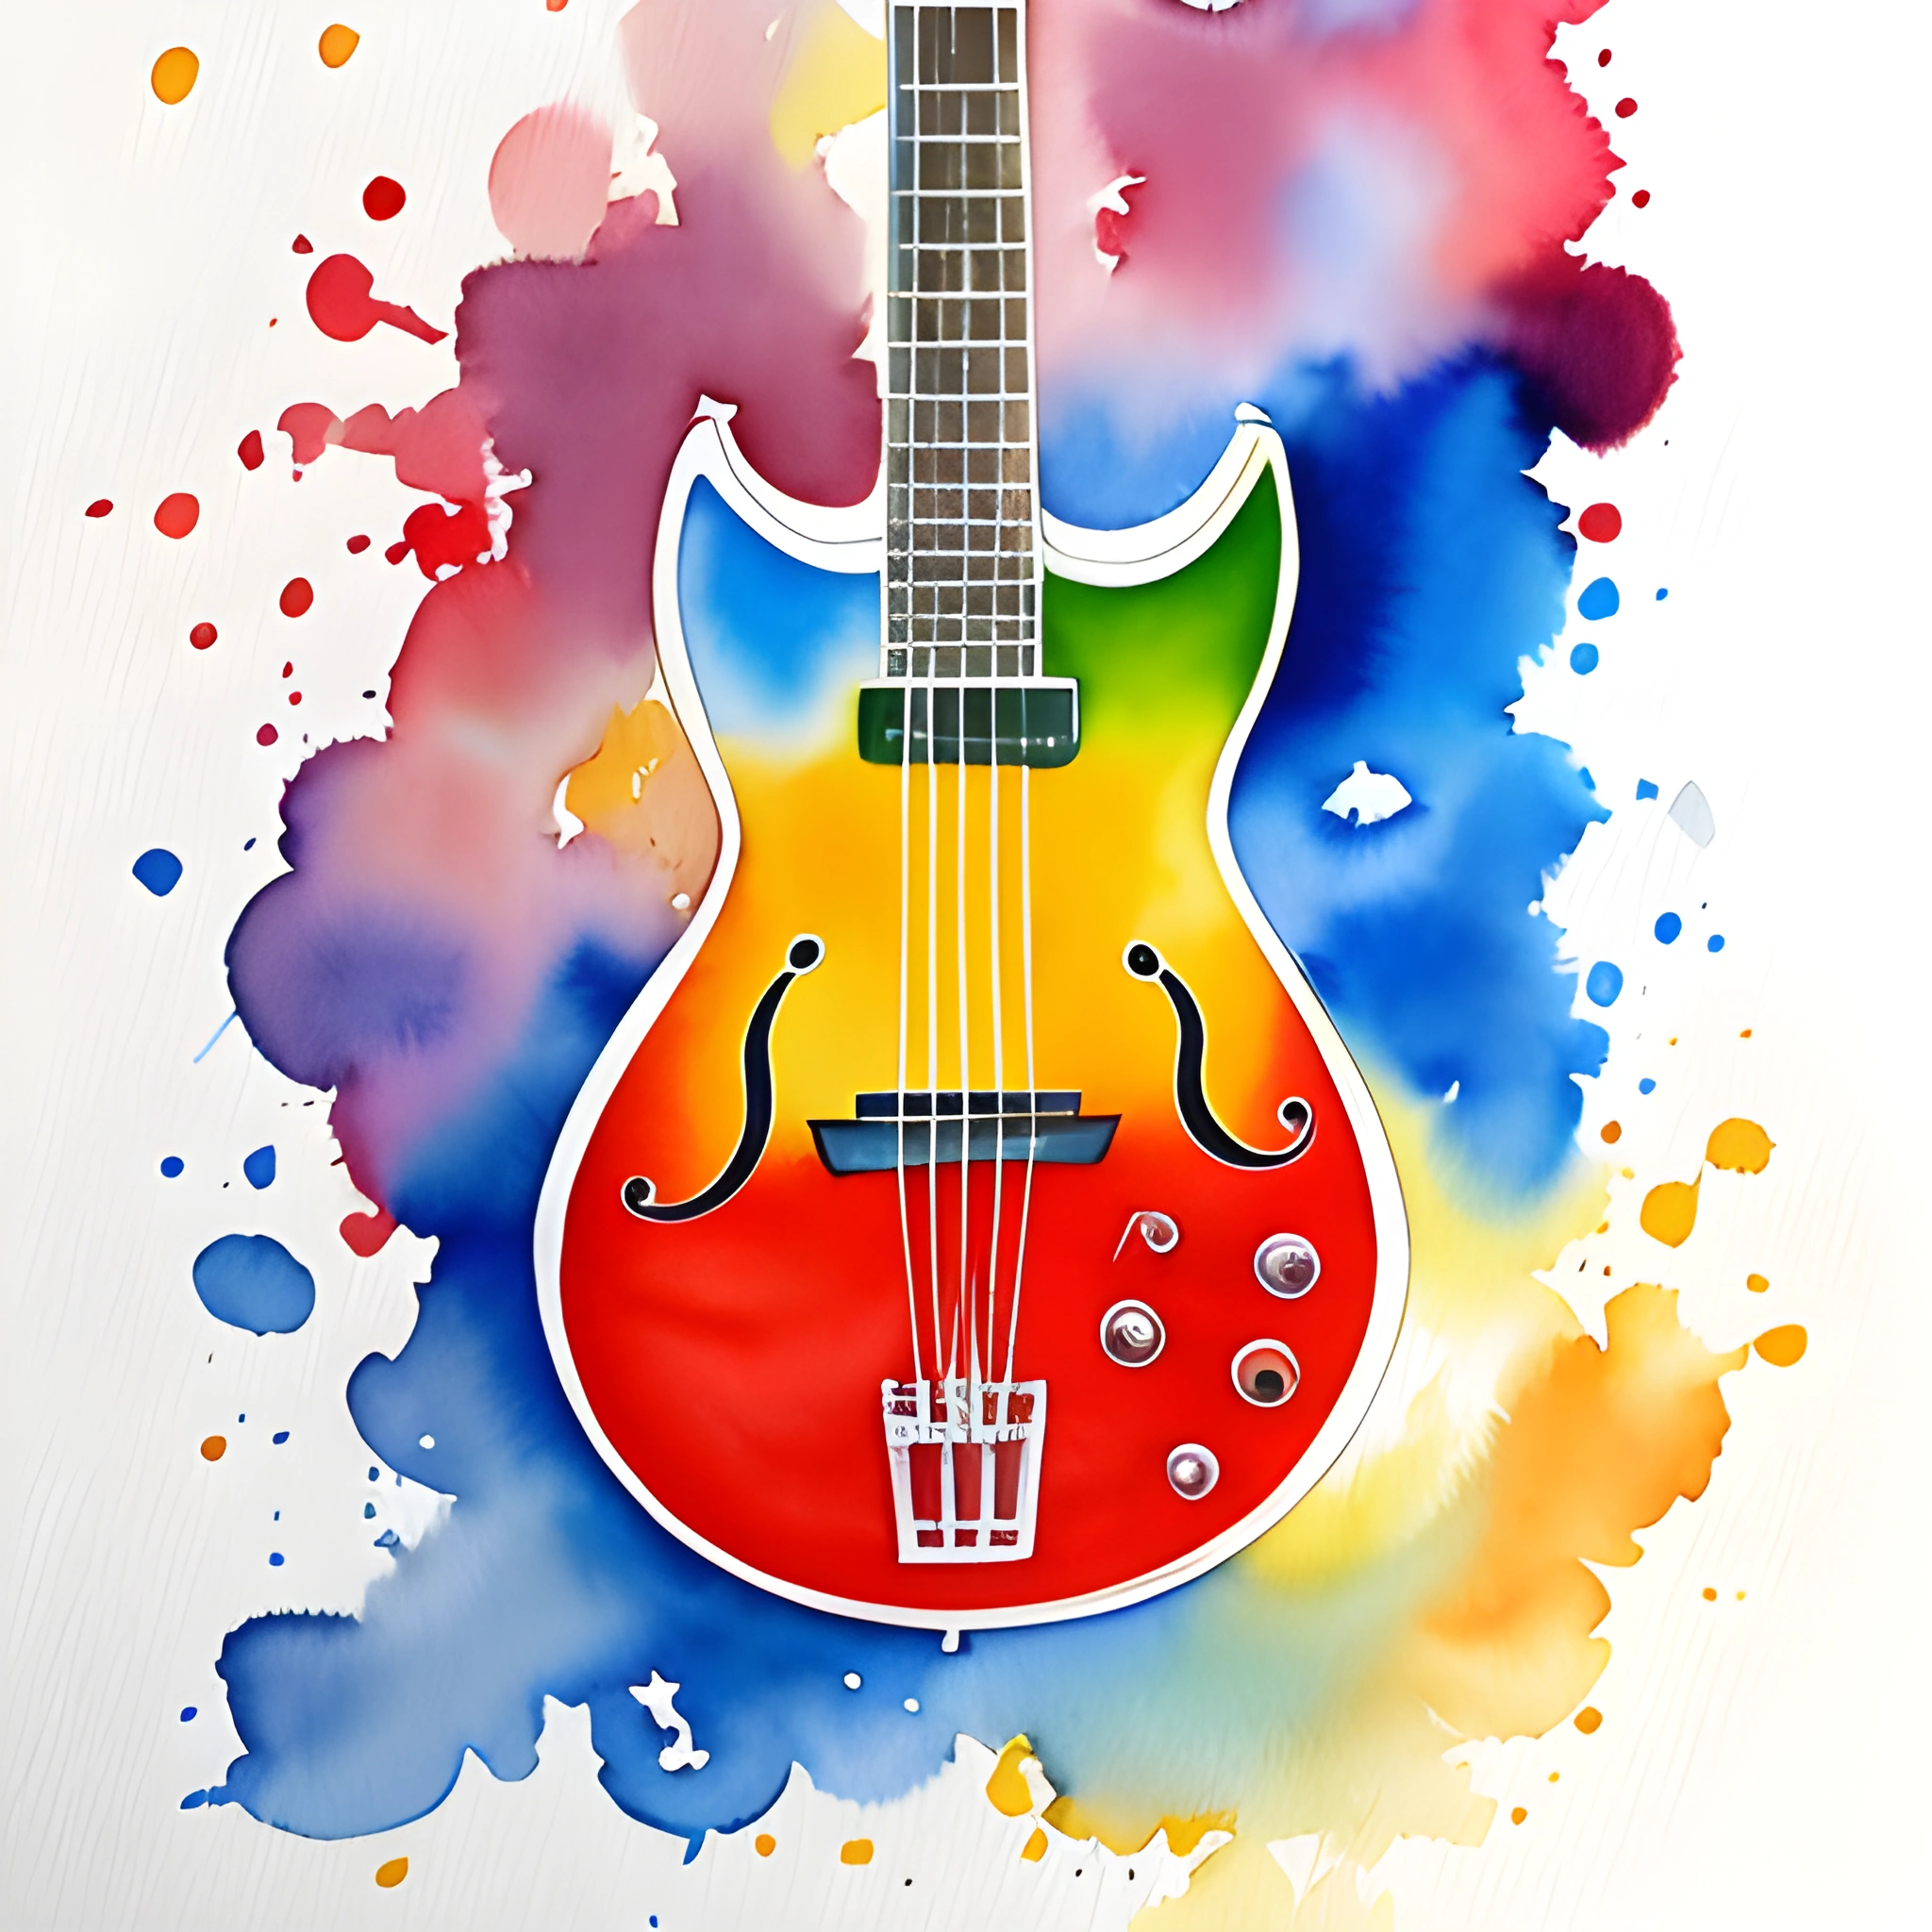 brightly colored guitar with a splash of paint on the body